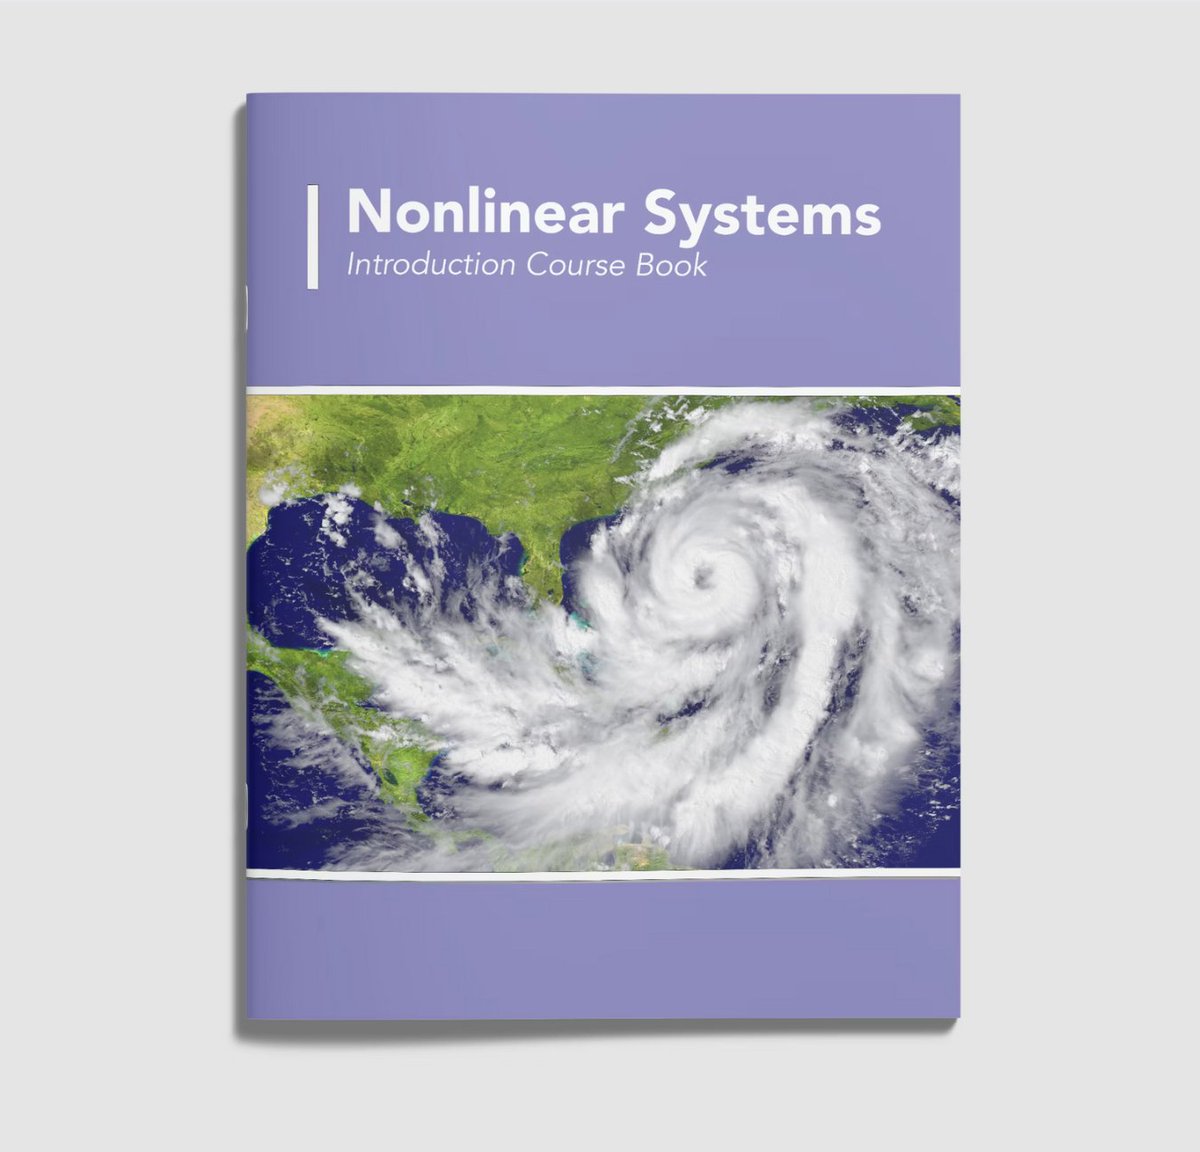 Have you discovered the amazing world of nonlinear systems and chaos yet? This guide booklet and video course will give you a gentle introduction to these key ideas that are central to understanding complex systems. Booklet: t.ly/V8Ep0 Course: t.ly/w9sYM